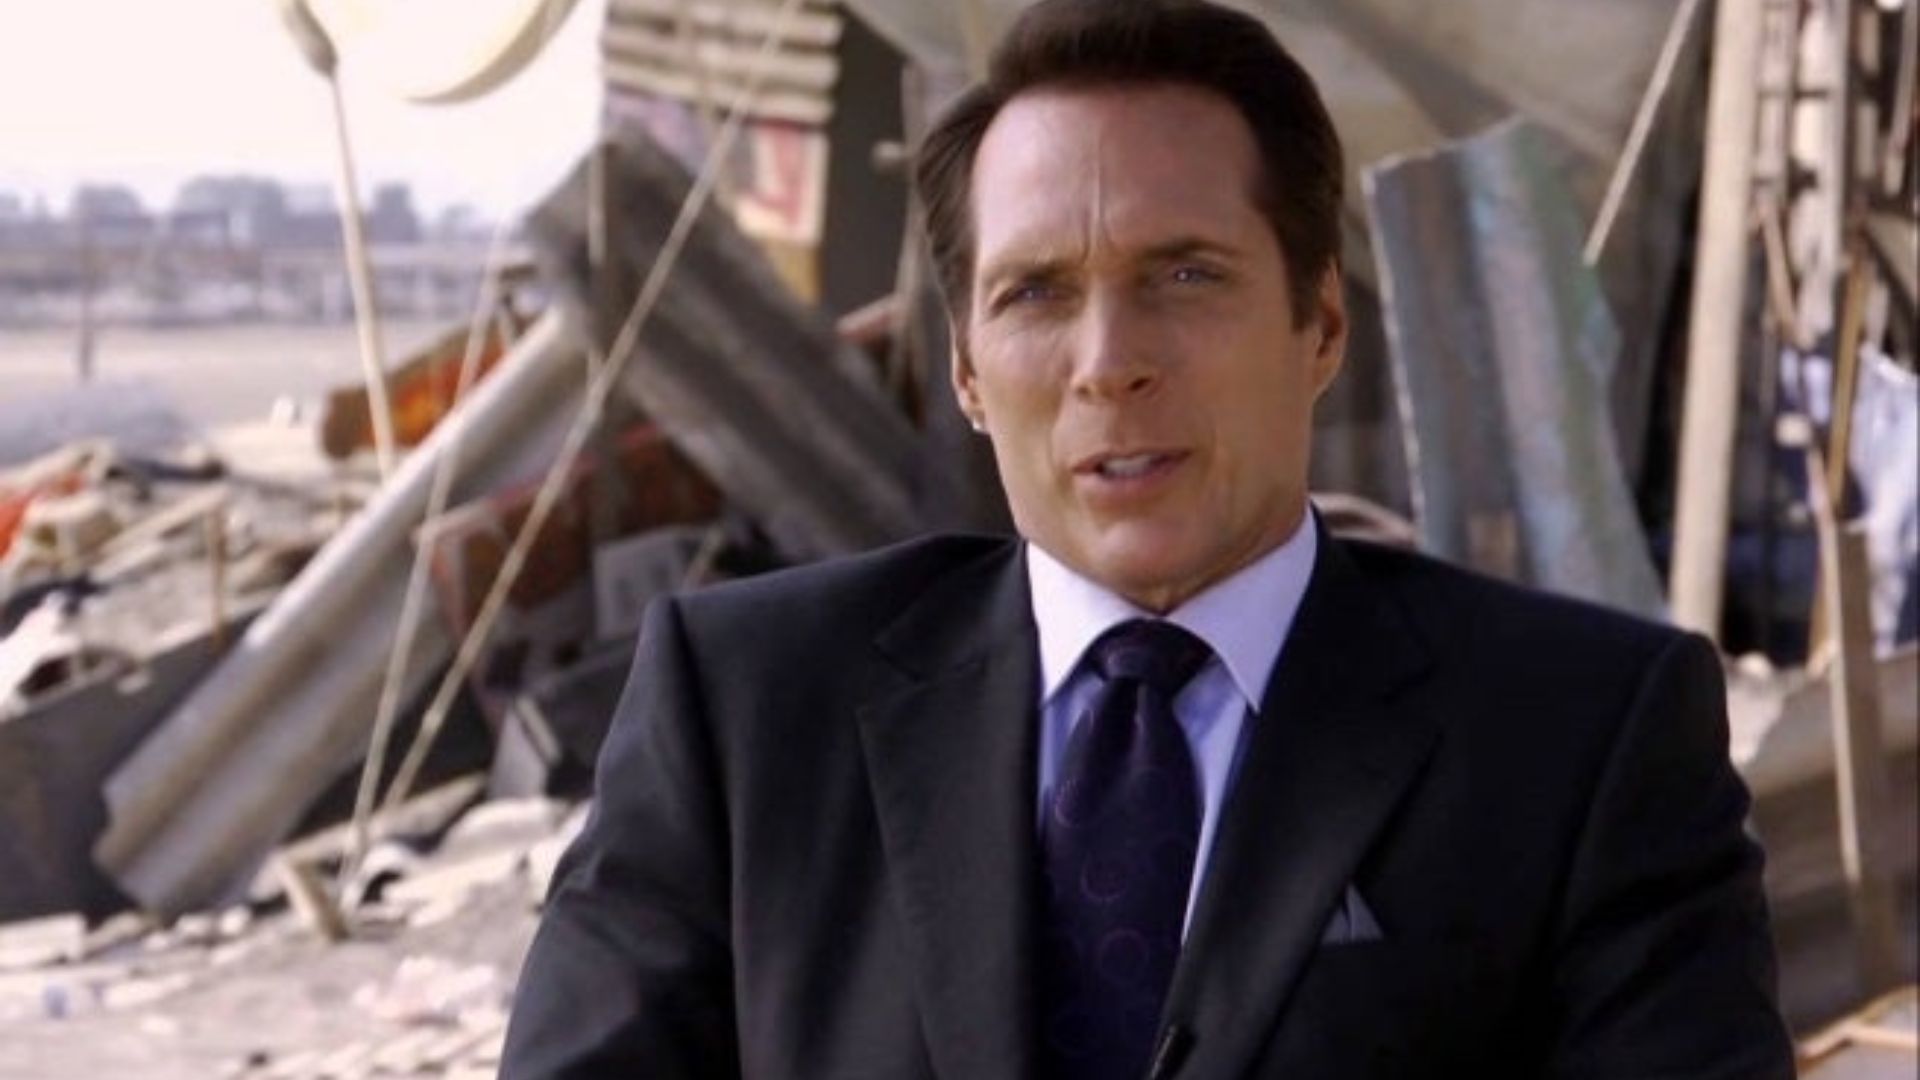 William Fichtner - Known For His Television Roles As Sheriff Tom Underlay On Invasion